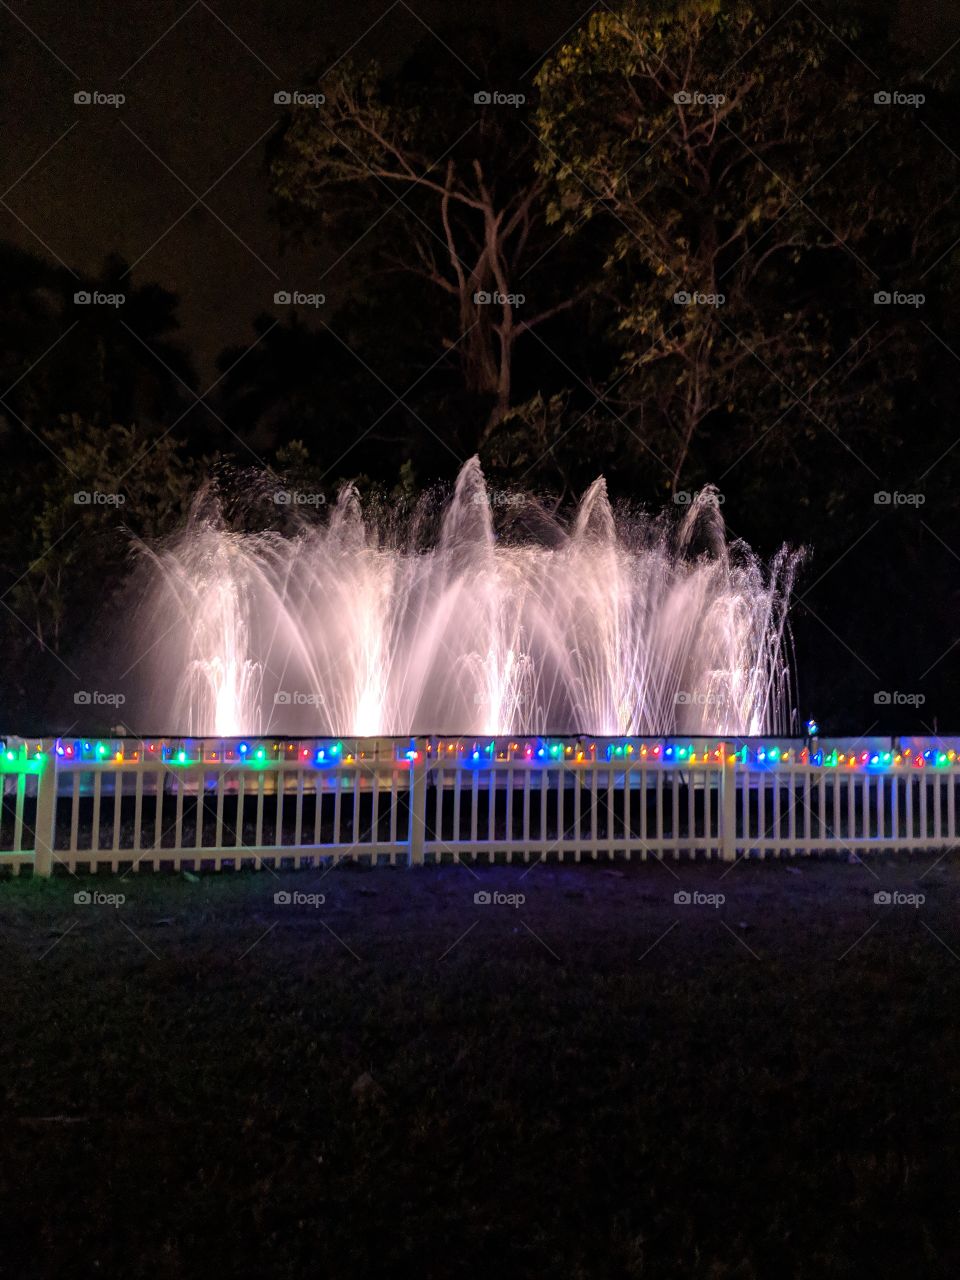 Dancing Waters at the winter estate of Edison and Ford, Fort Meyers, FL taken 12/2018